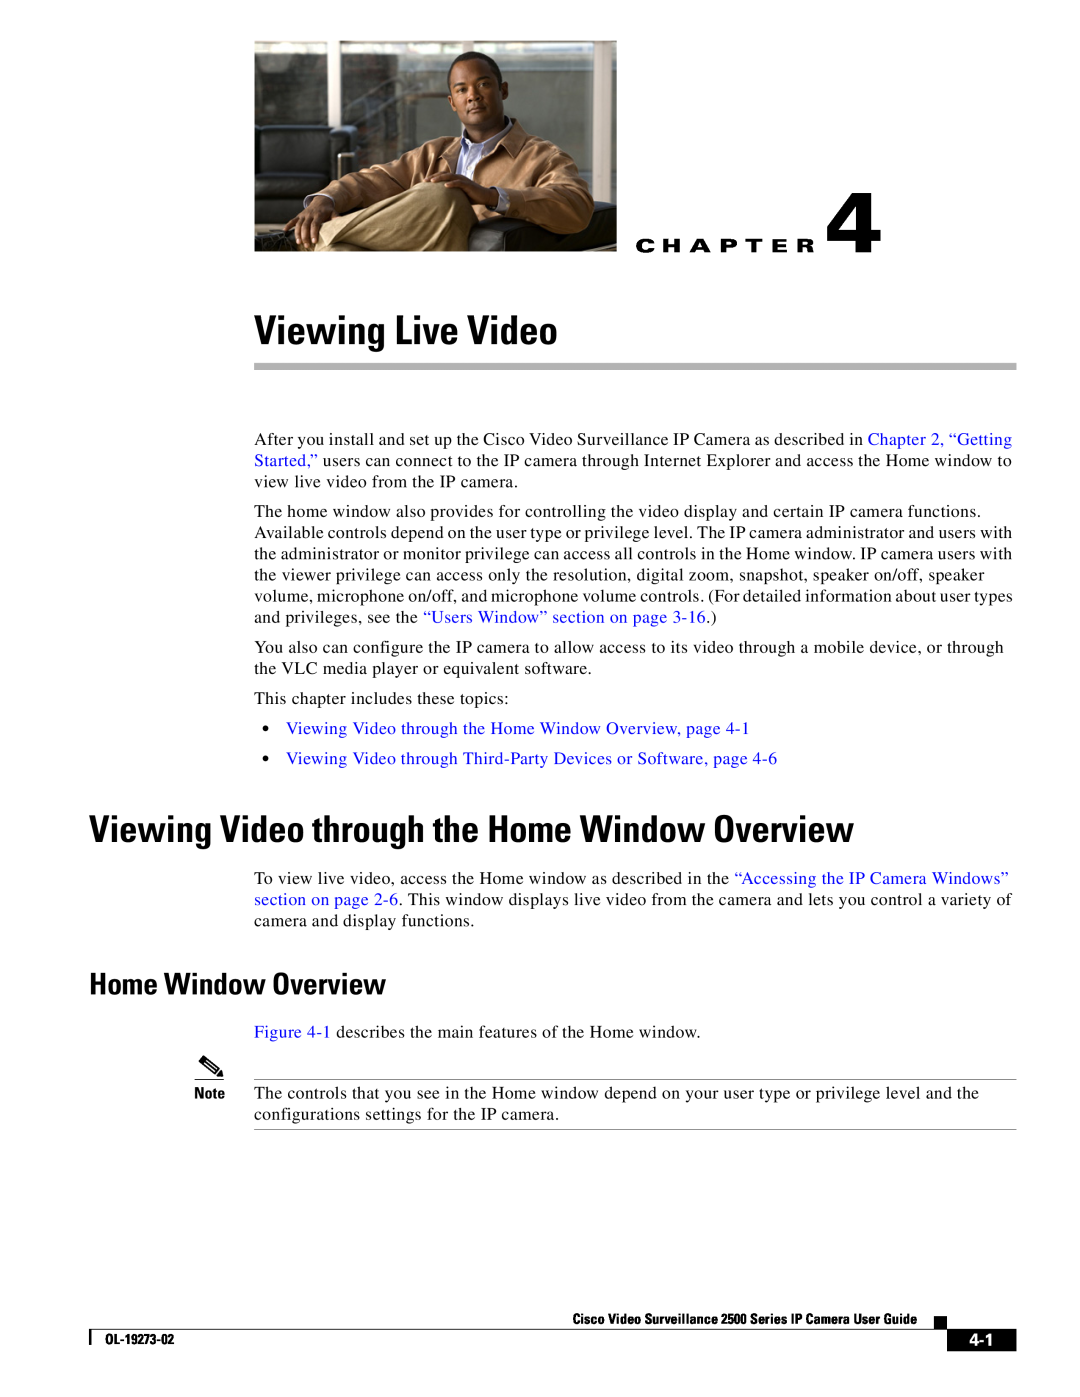 Cisco Systems CIVS-IPC-2500, 2500 Series Viewing Live Video, Viewing Video through the Home Window Overview, C H A P T E R 